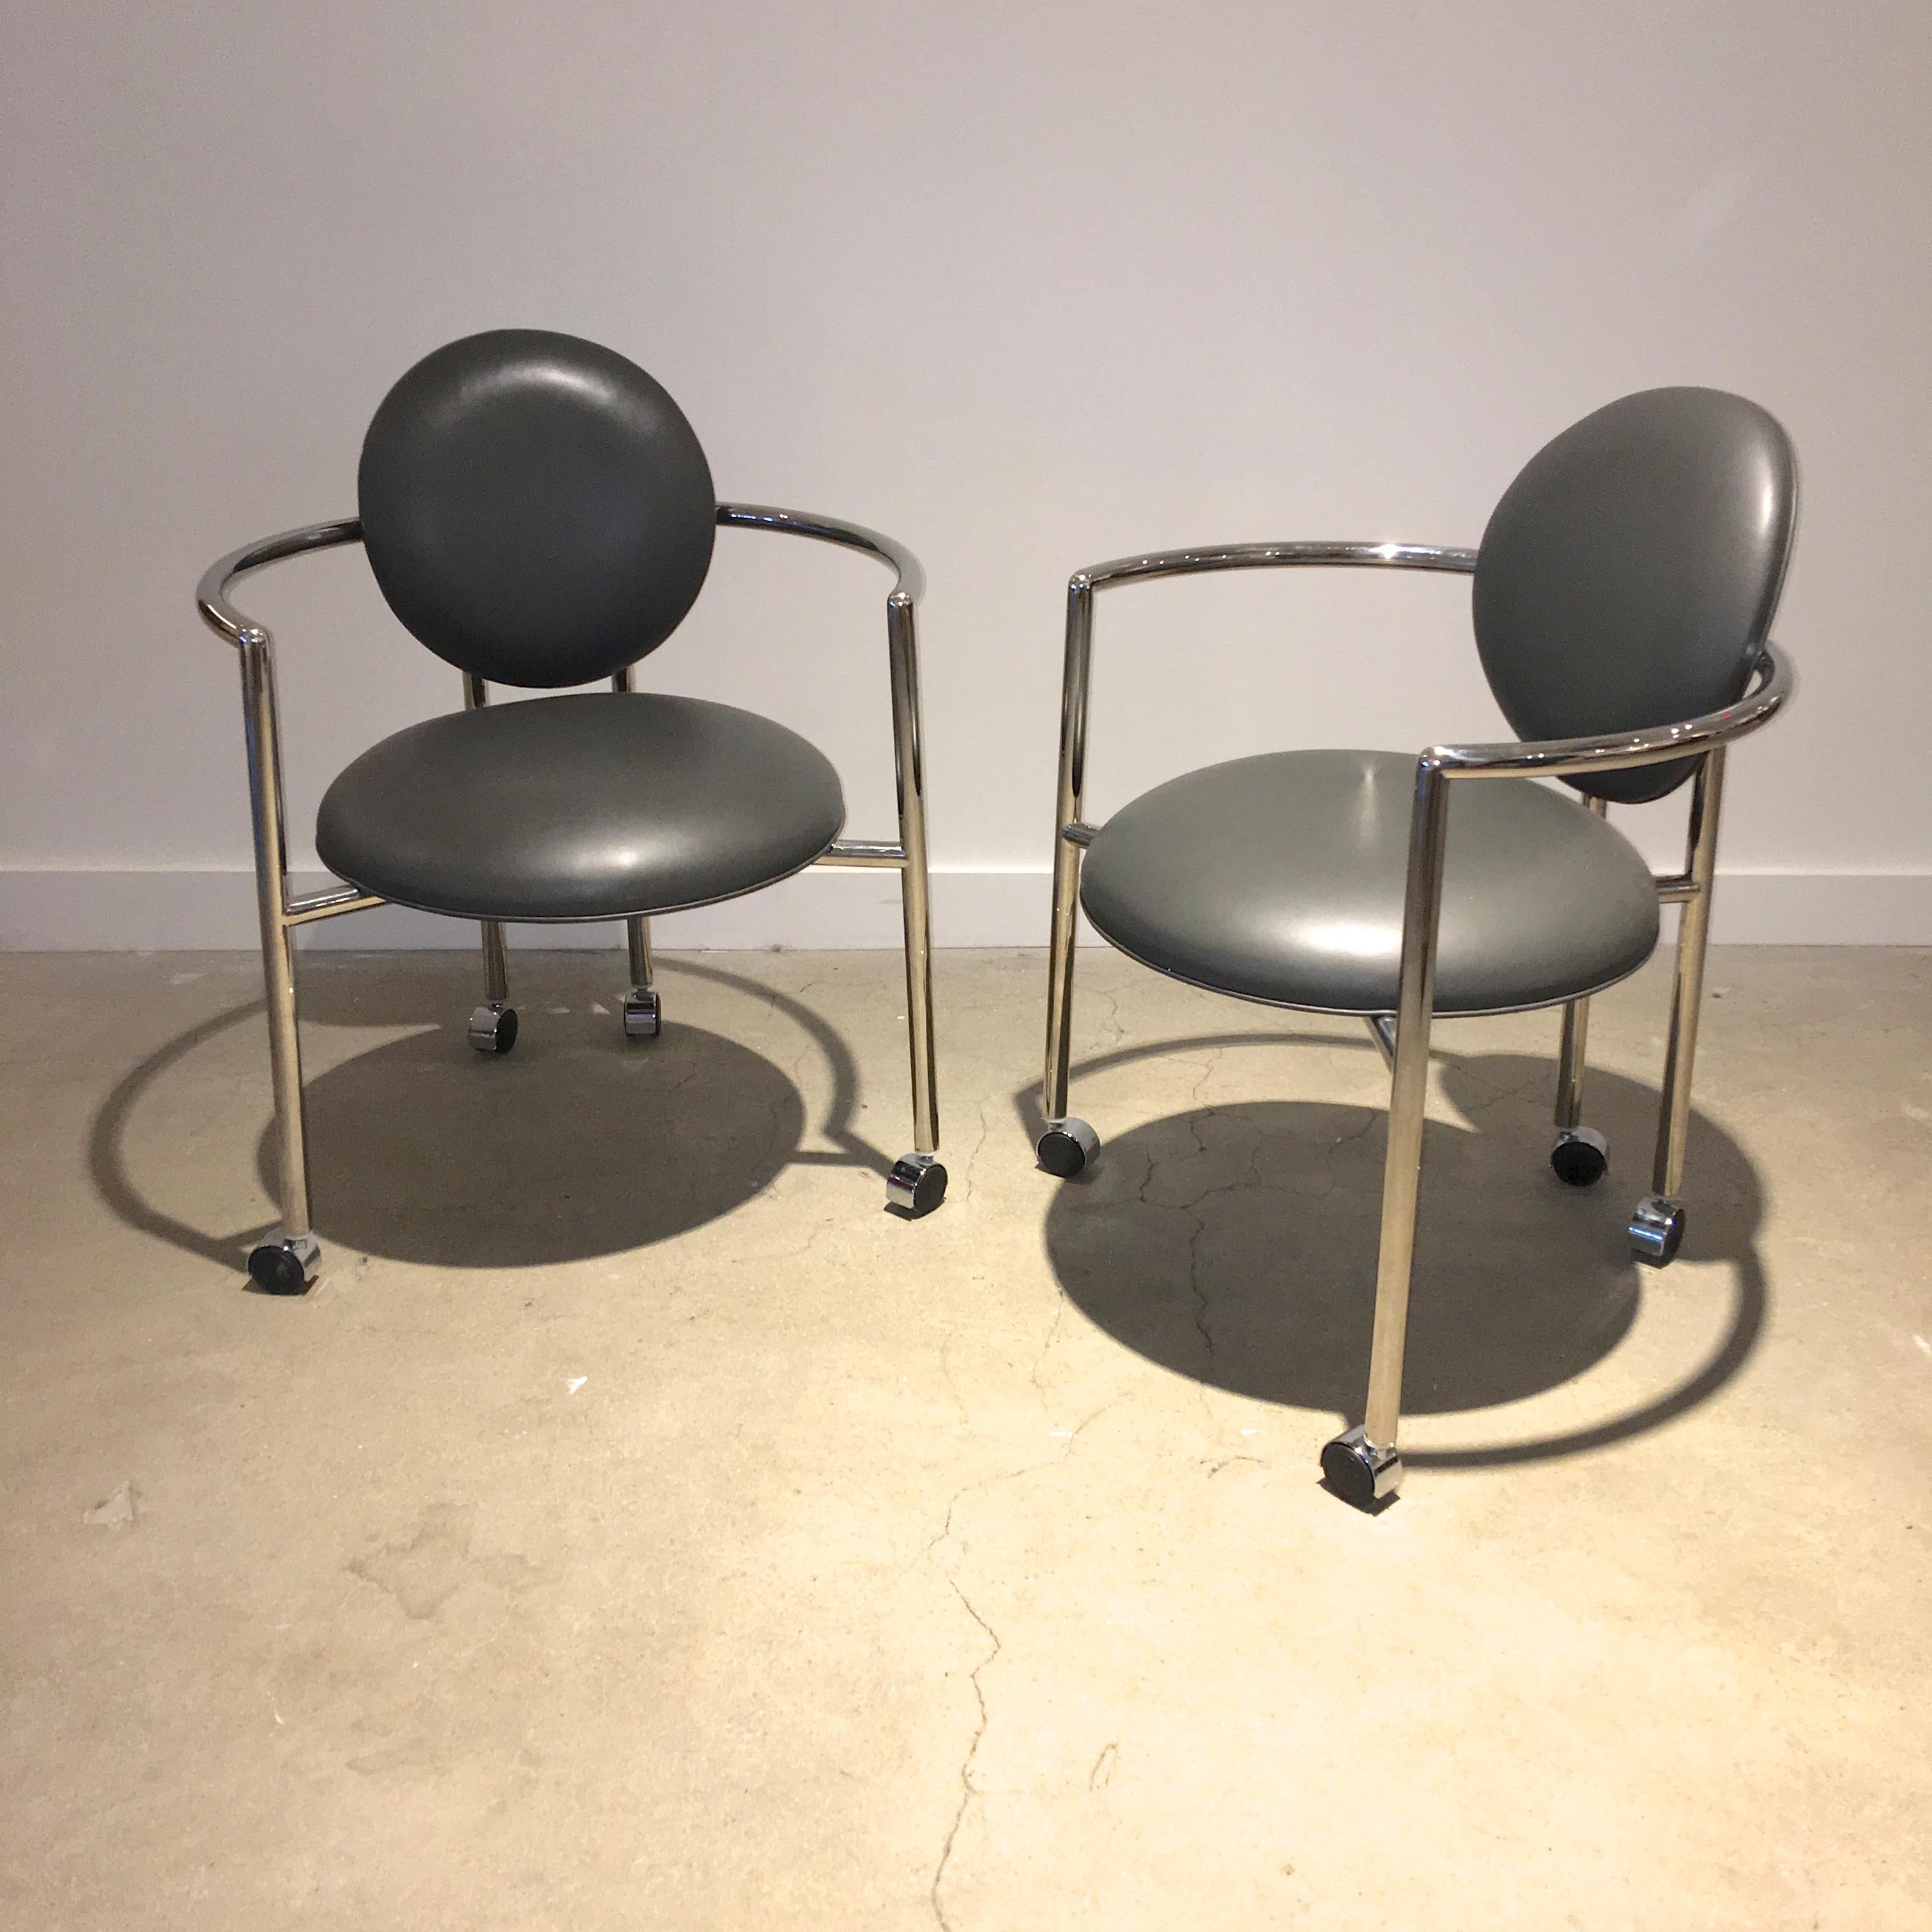 Pair of Moon chairs designed in 1986 by Stanley Jay Friedman for Brueton.
Roundabout frame of mirror polished tubular No. 304 stainless steel arm chairs in the Memphis style. Seat and back upholstered in gray leather. 24